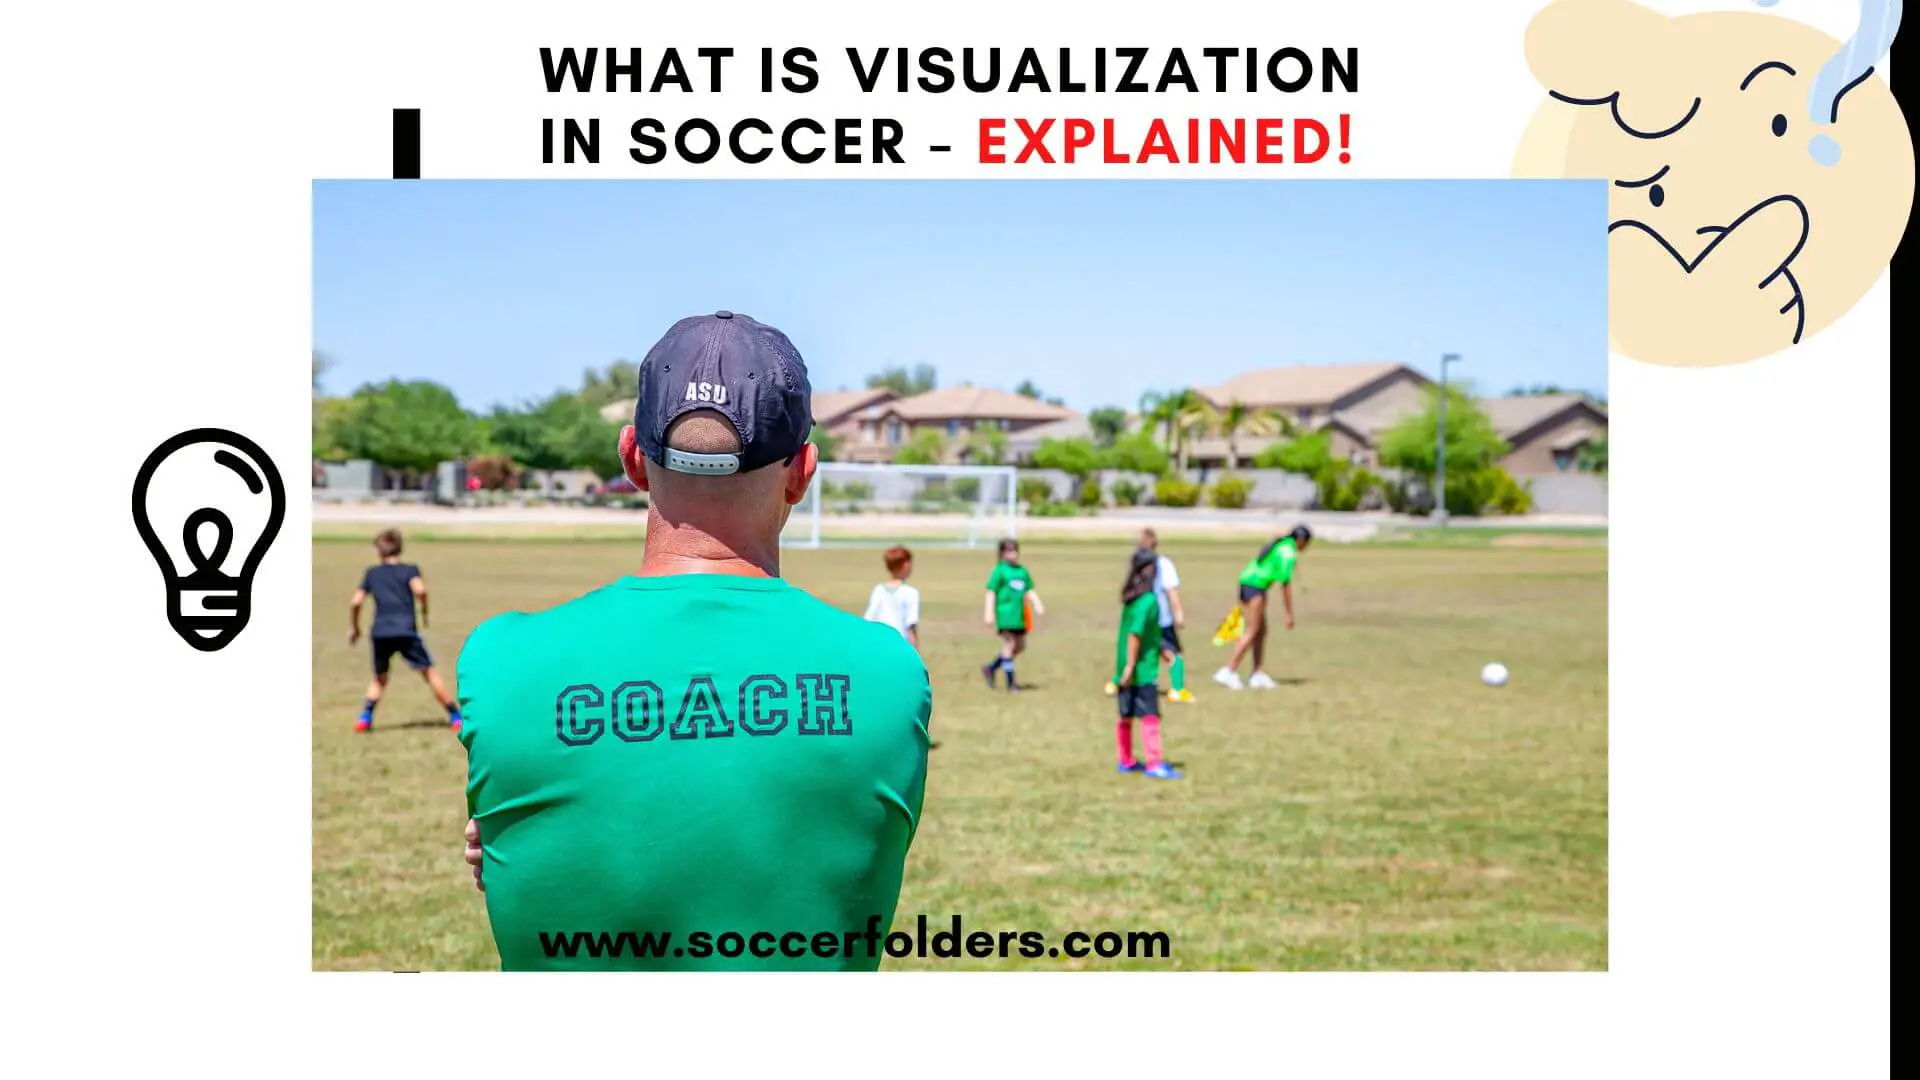 What is visualization in soccer - Featured Image